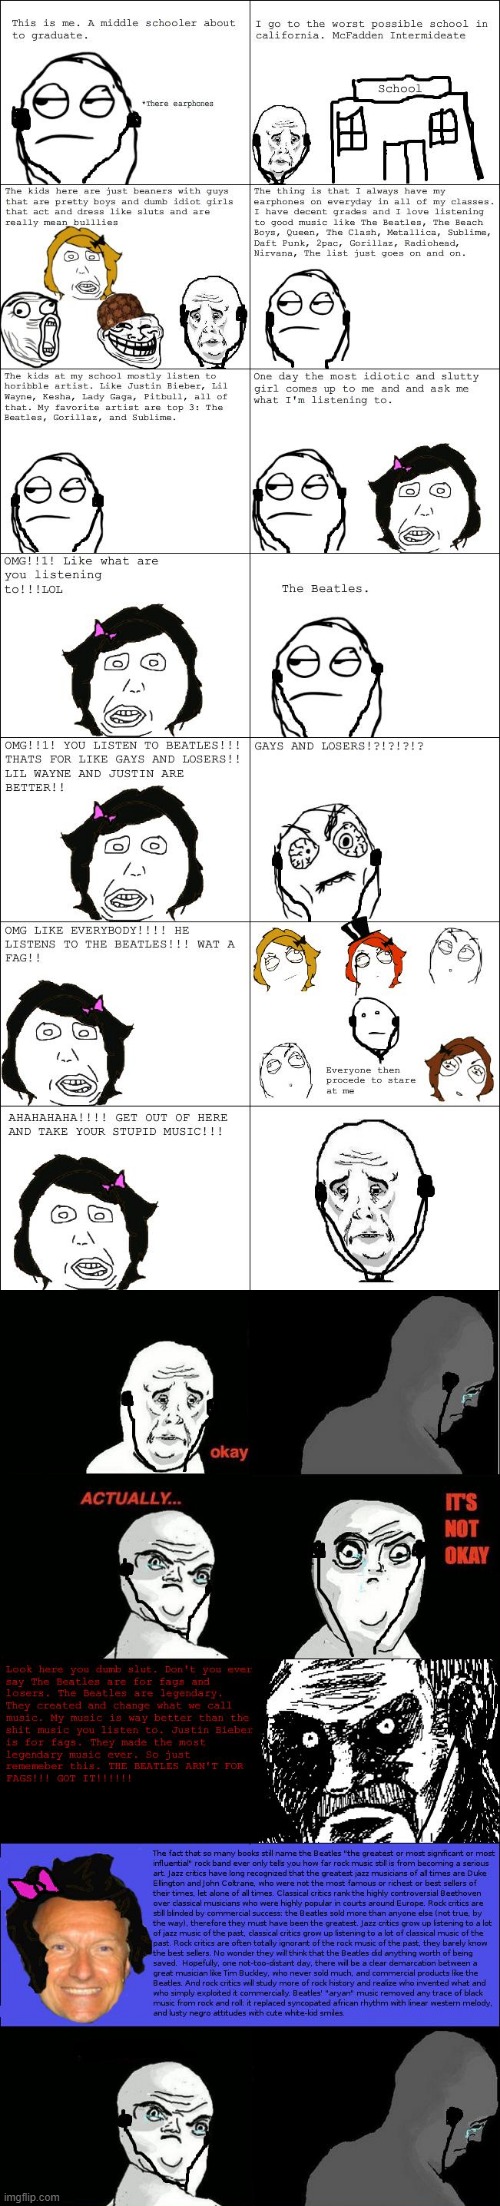 She KINDA has a good point though... | image tagged in the beatles,rage comics,school,funny,memes,comics/cartoons | made w/ Imgflip meme maker